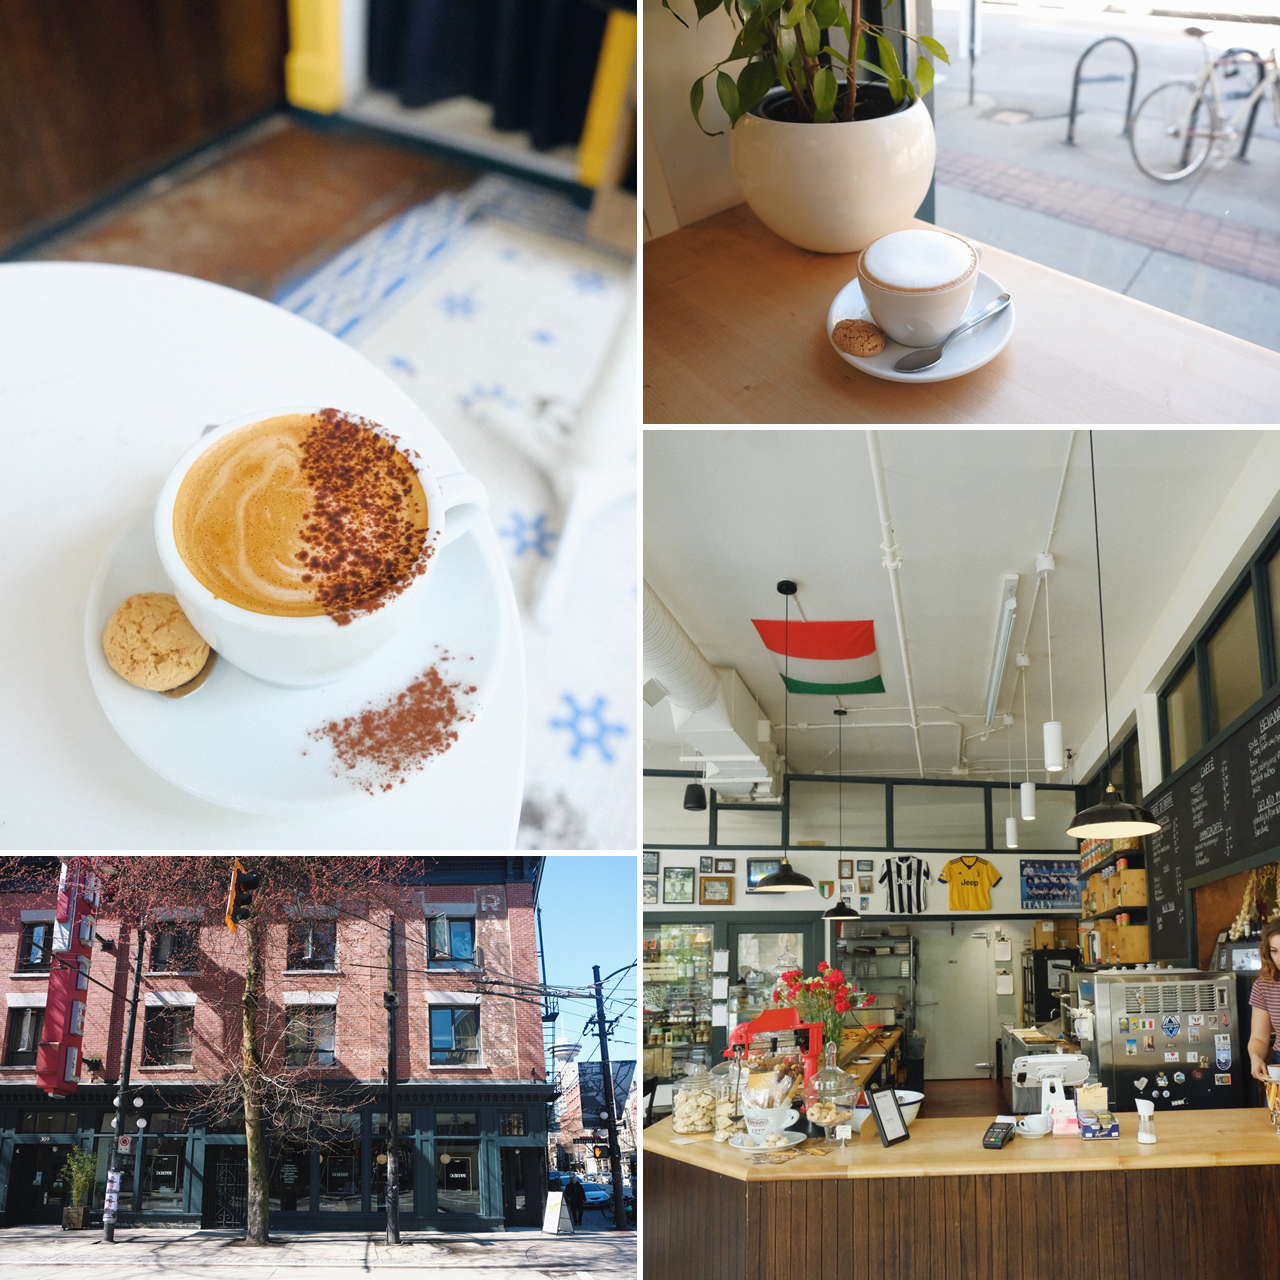 Caffe Di Beppe x Gastown.
“The front-facing coffee shop portion of the two-hander space of Di Beppe, has quickly become a charming little cafe destination after replacing over the short-lived Joe Pizza location from the same proprietors behind St....